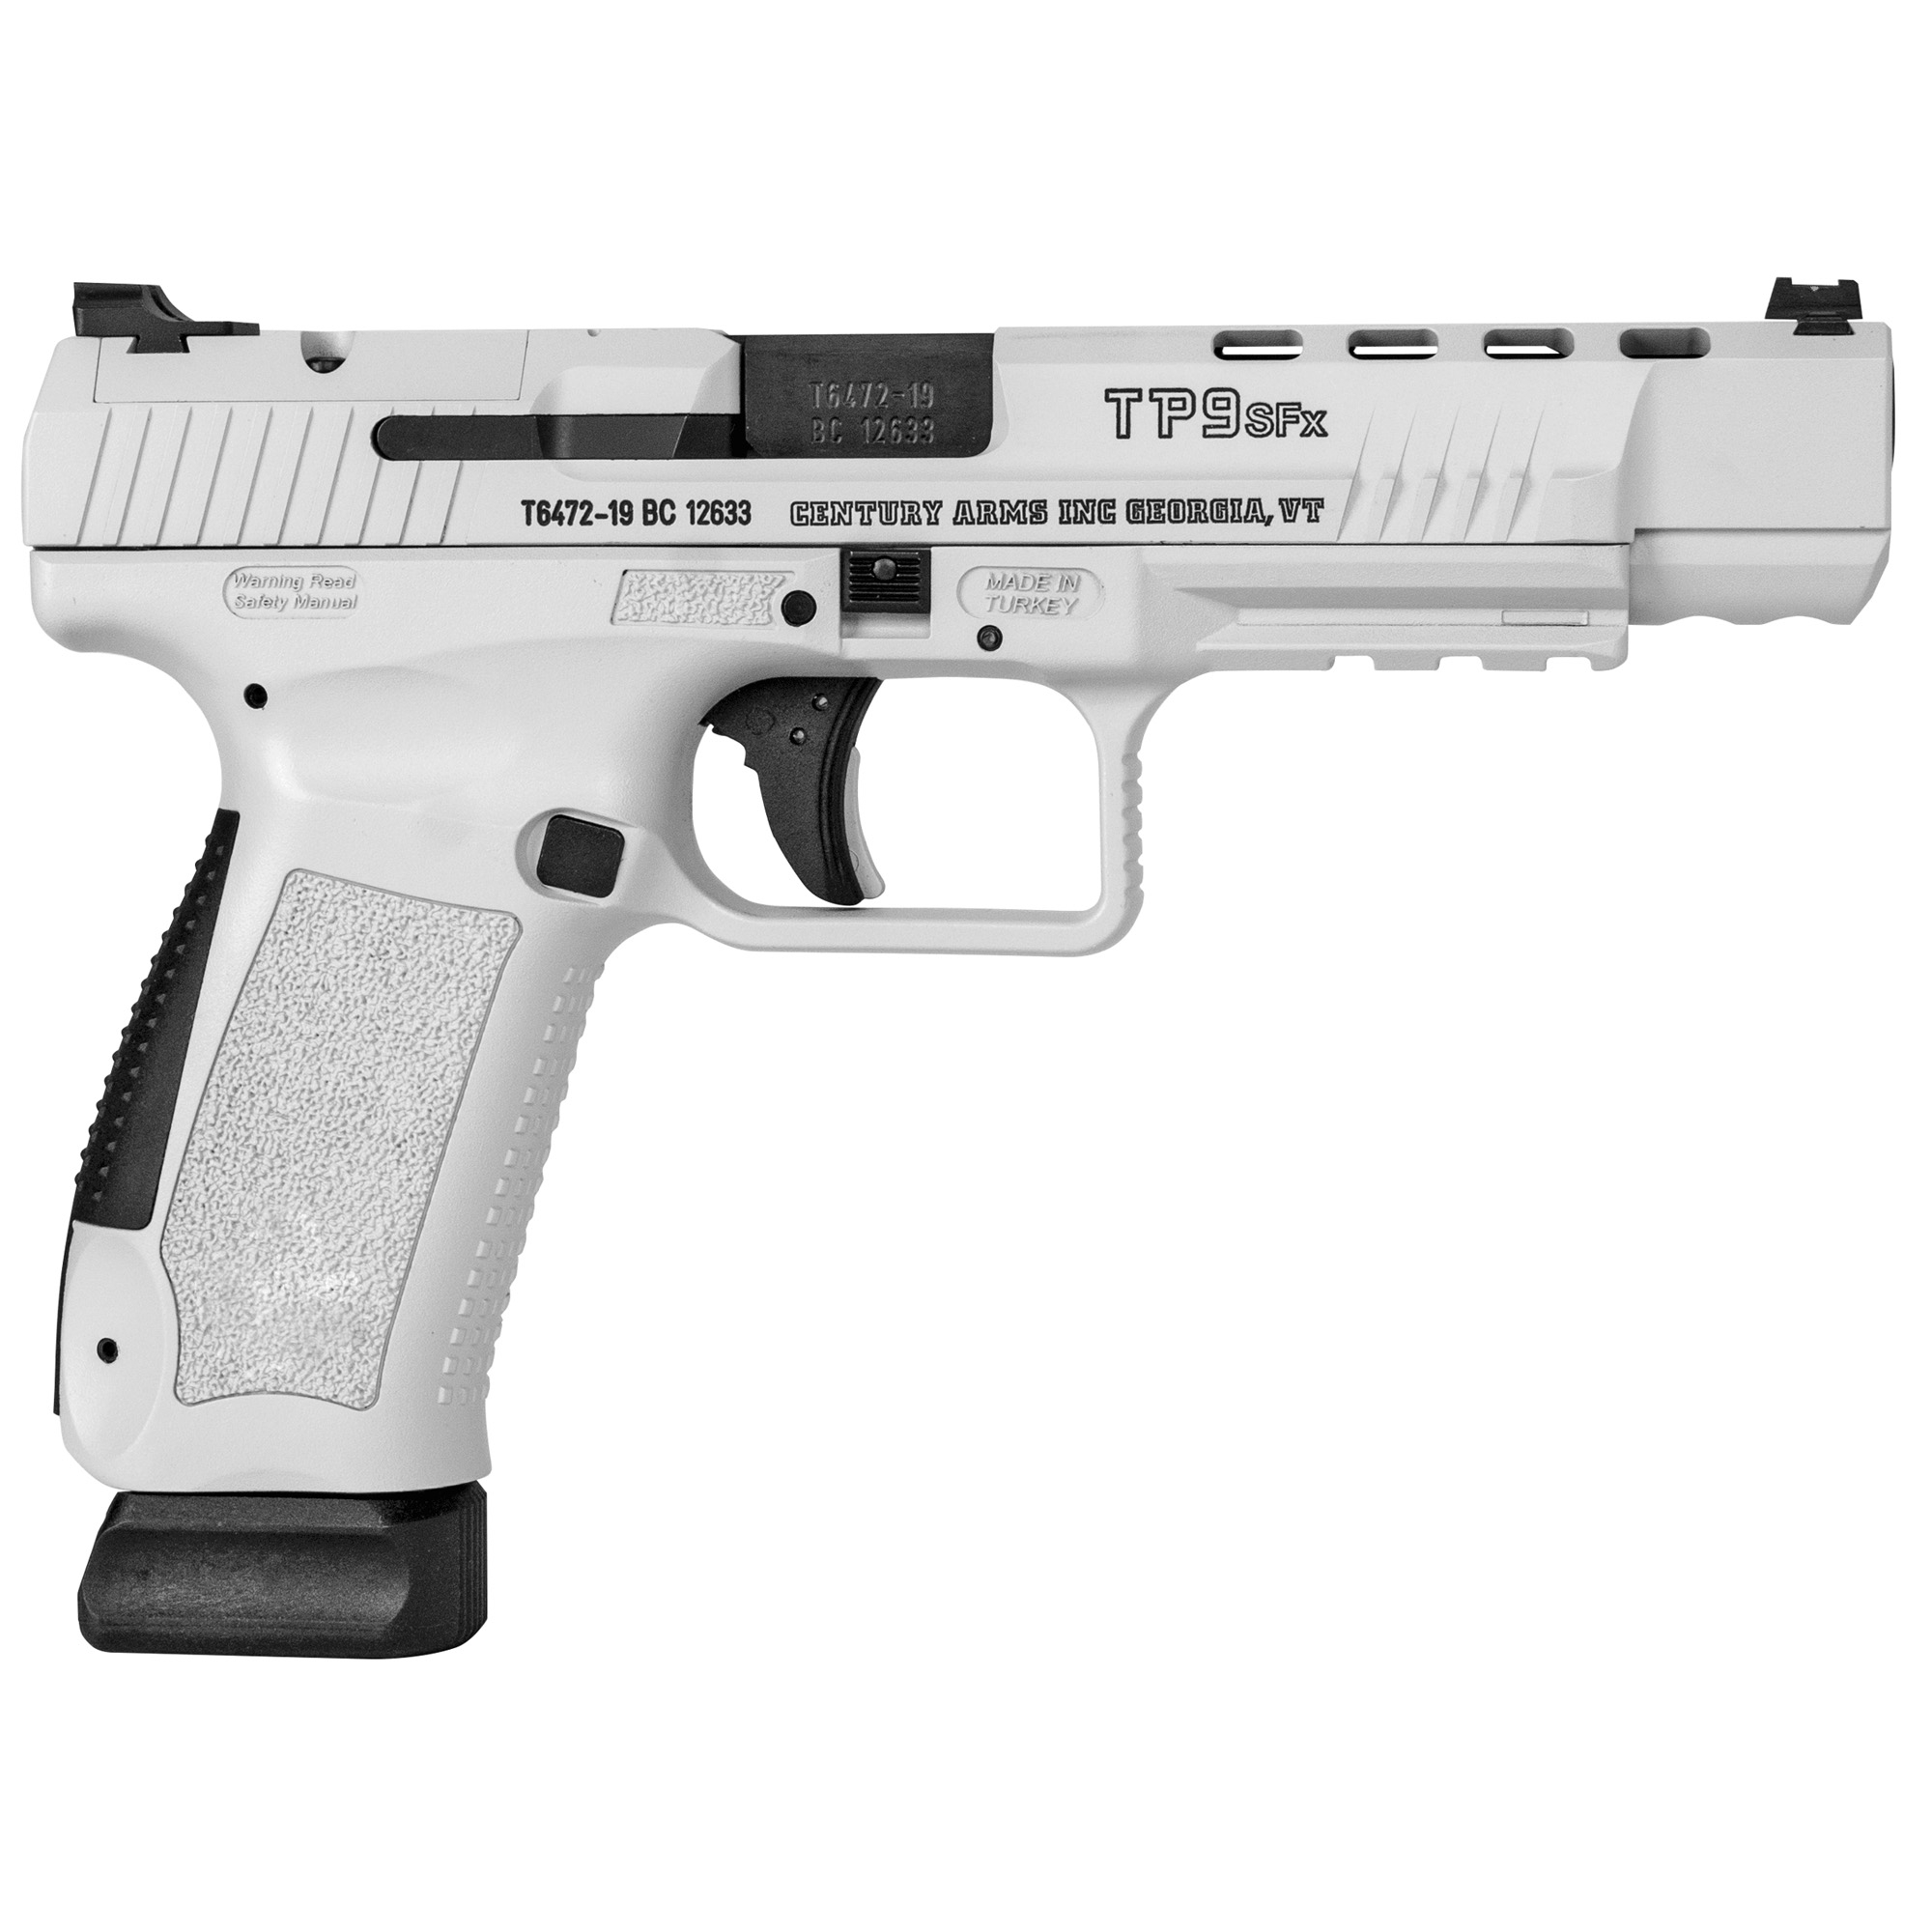 canik-tp9sfx-9mm-pistol-5-2-barrel-white-out-20rd